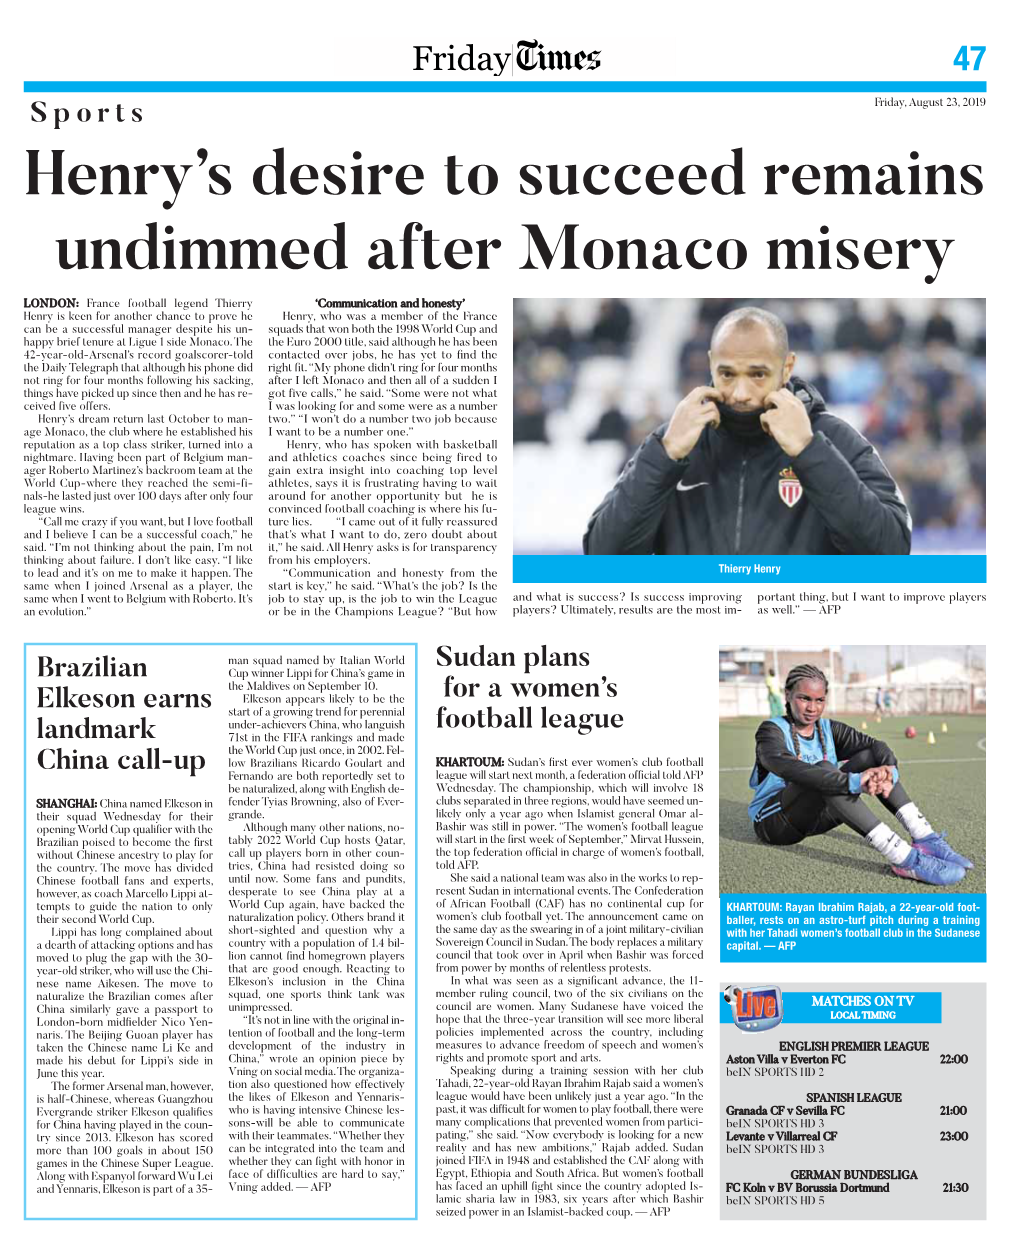 Henry's Desire to Succeed Remains Undimmed After Monaco Misery